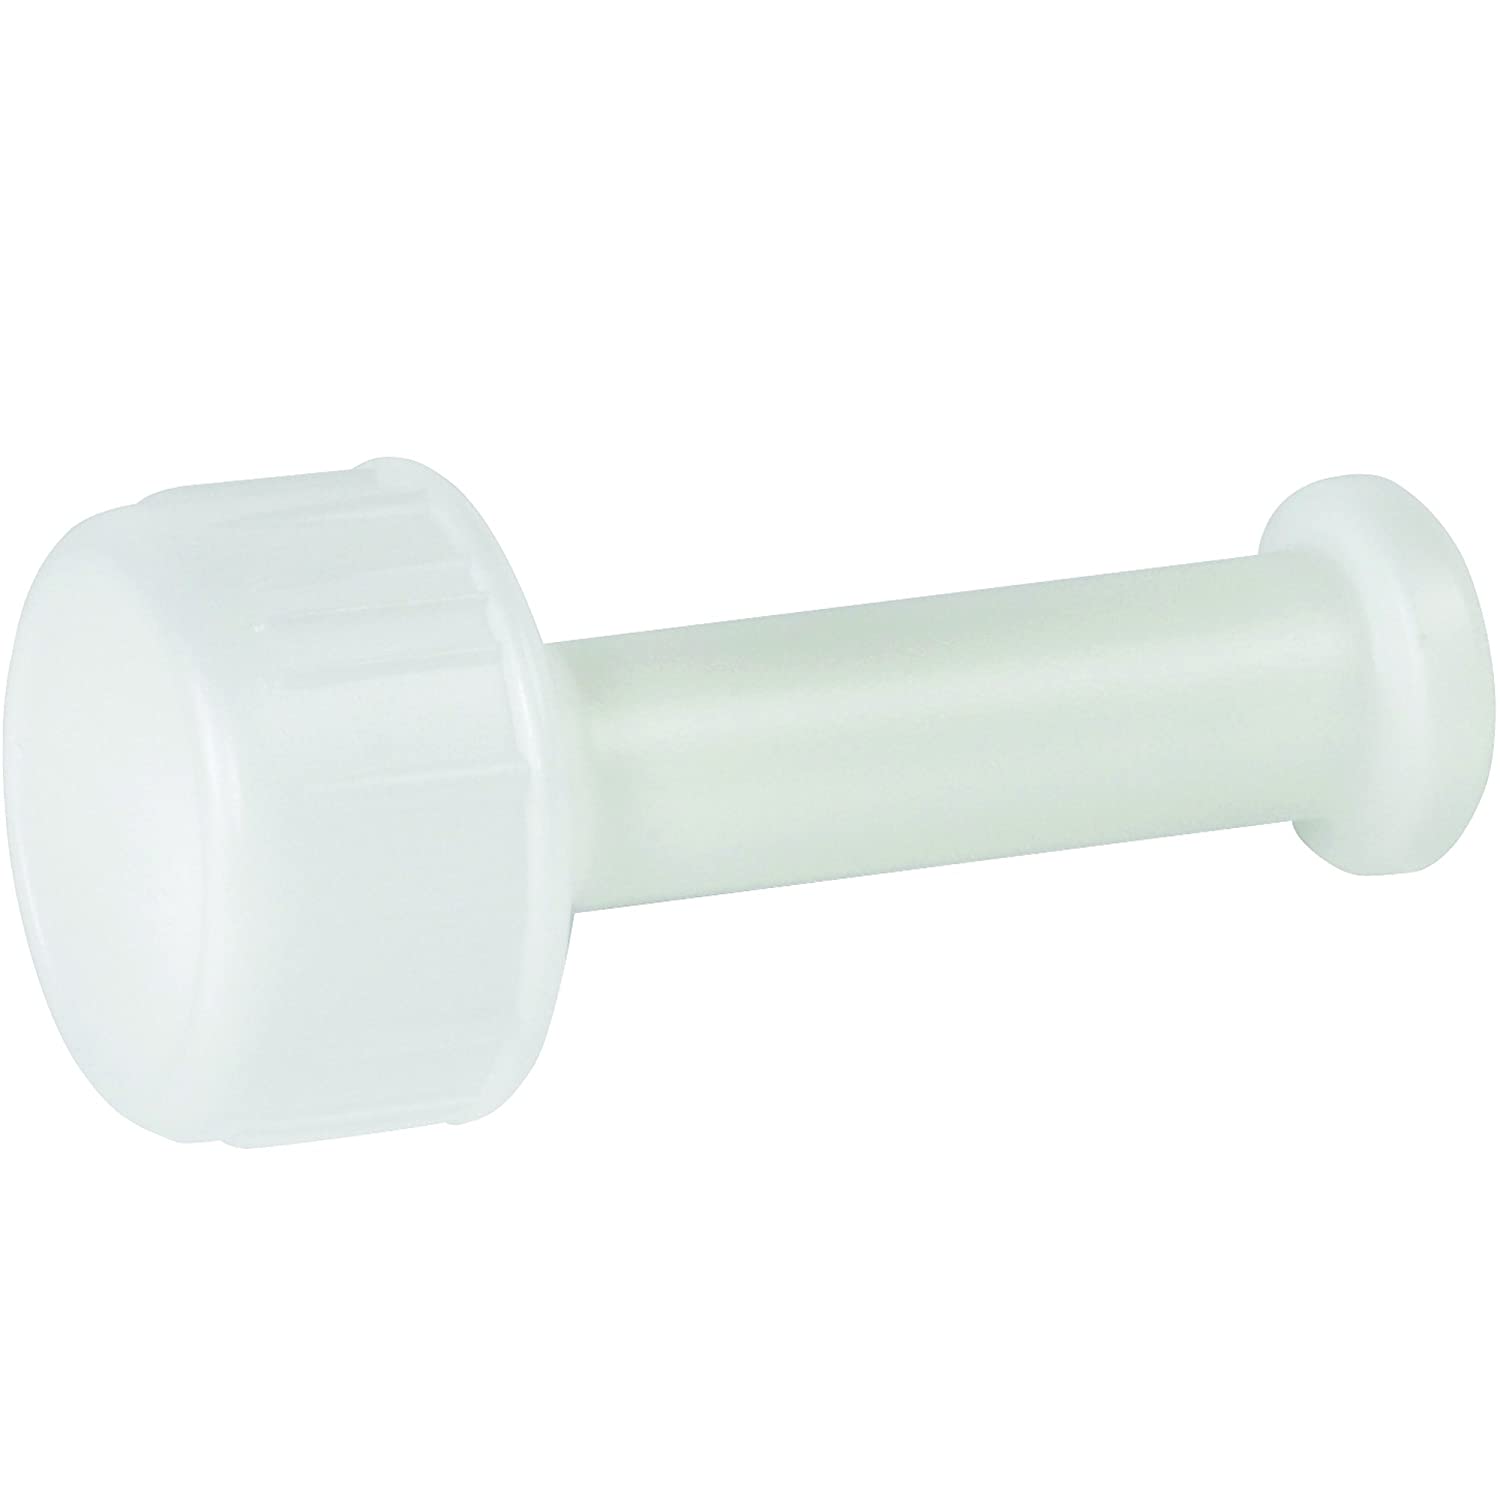 Stretch Film Wrap Dispenser With White Plastic Handle and 3